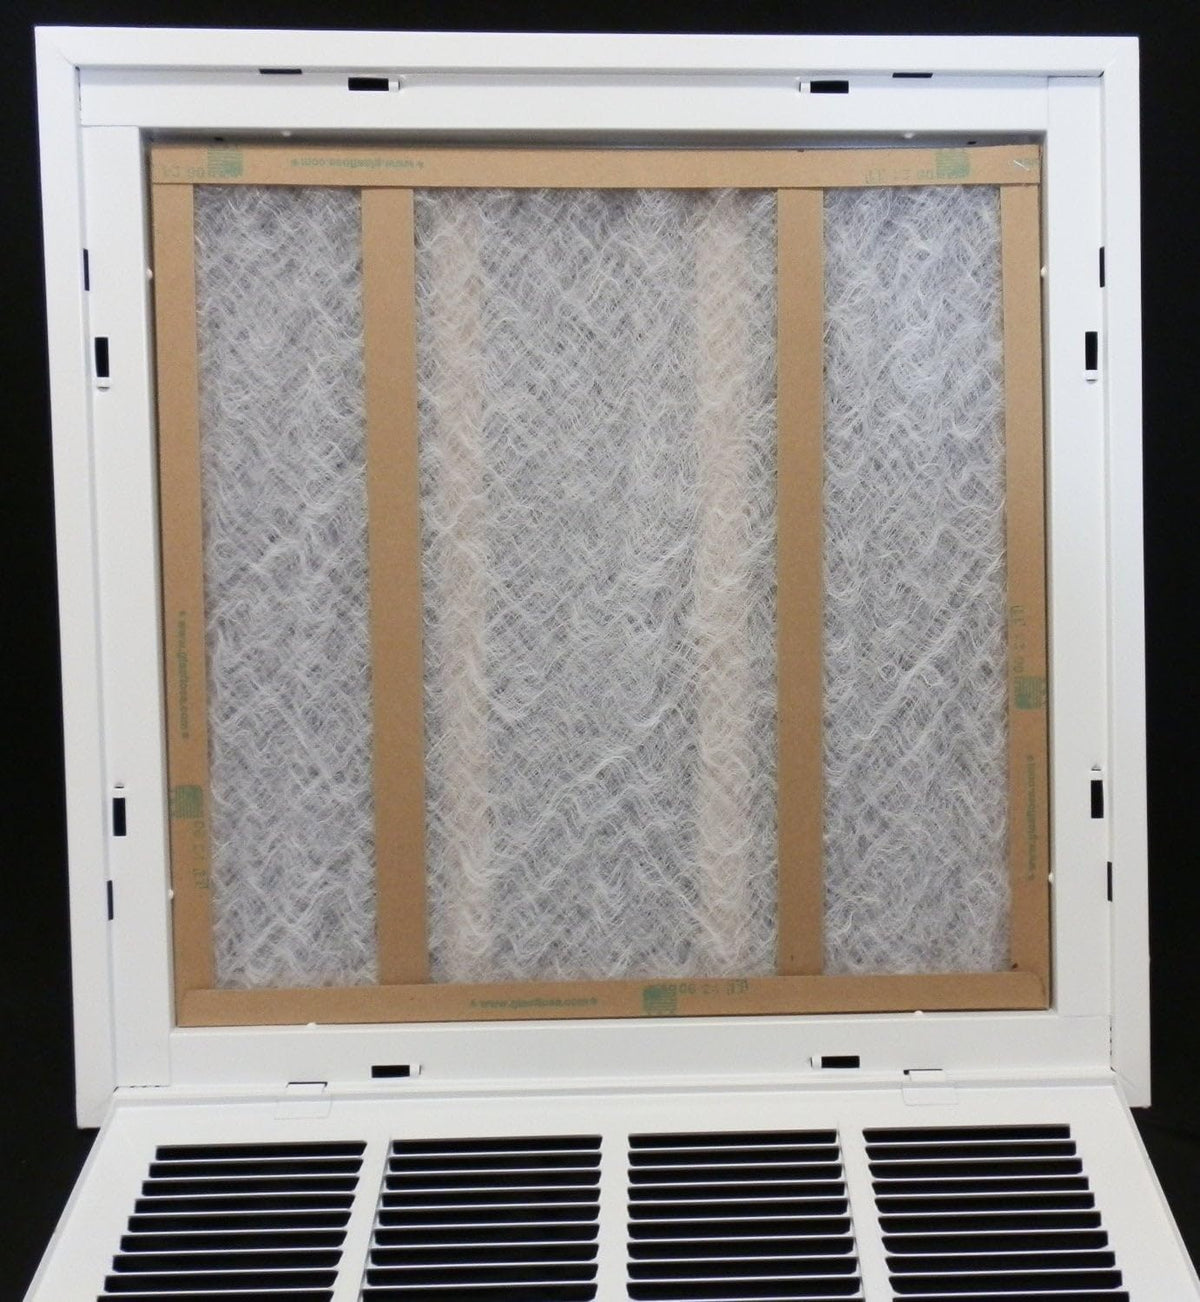 20&quot; X 22&quot; Steel Return Air Filter Grille for 1&quot; Filter - Removable Frame - [Outer Dimensions: 22 5/8&quot; X 24 5/8&quot;]